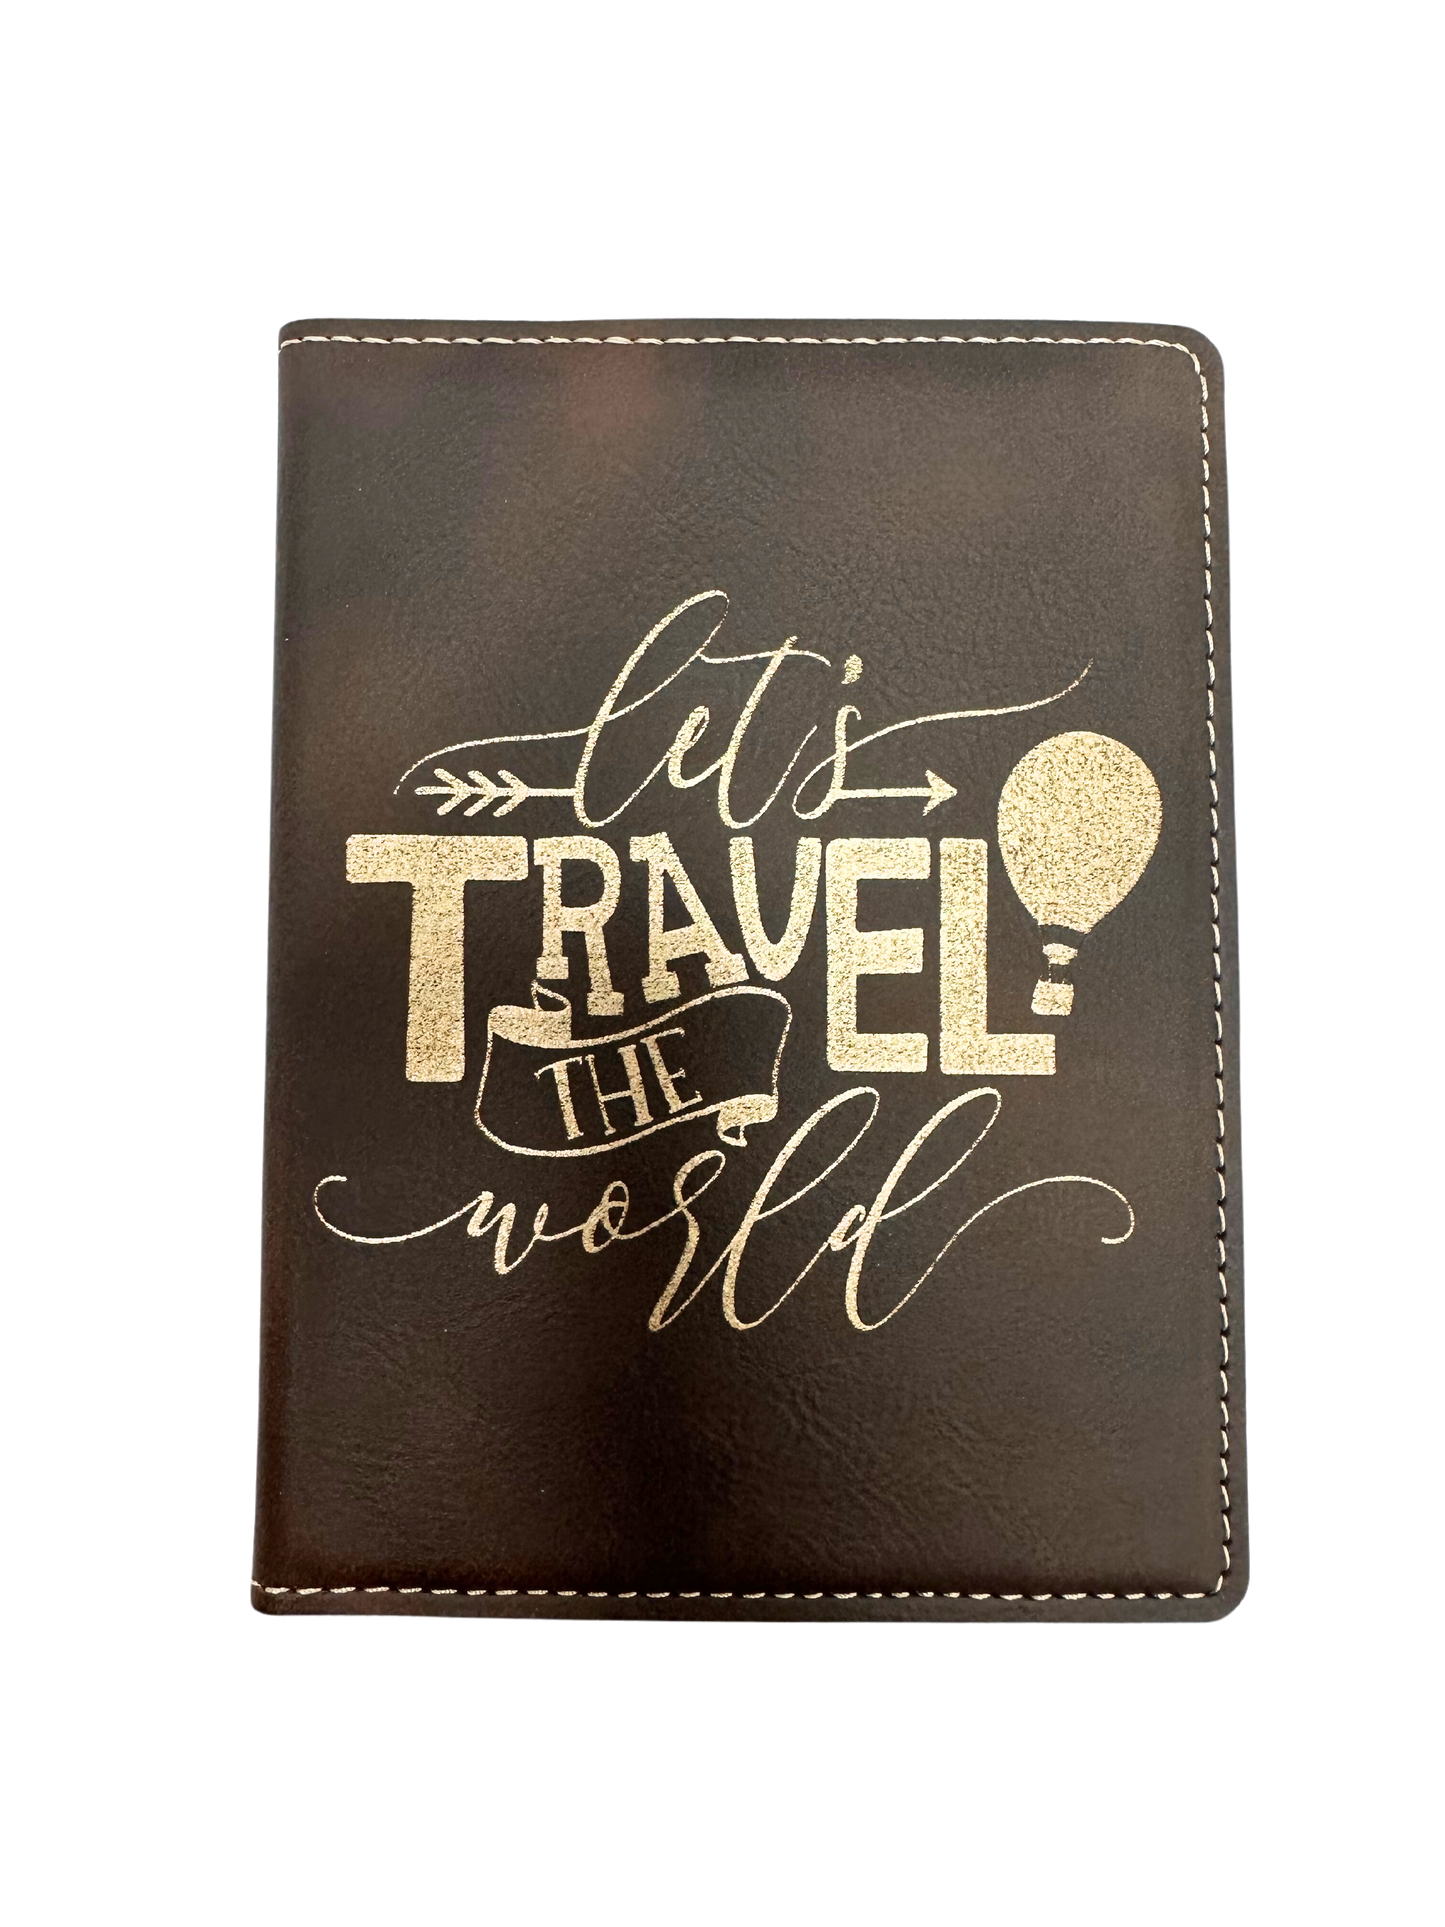 Let’s travel the world passport cover